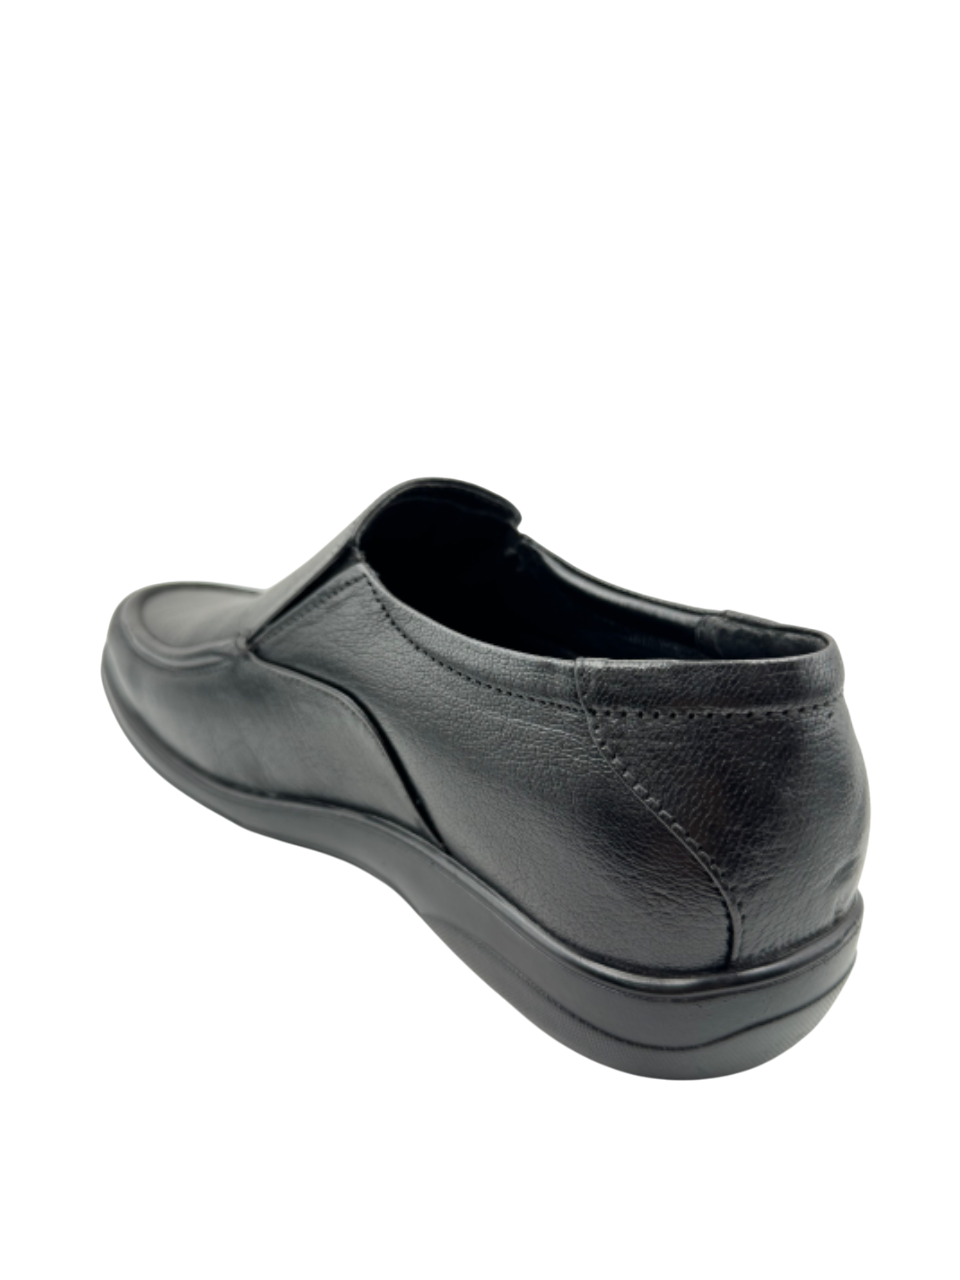 Ortho Soft Doctor Shoes GTSS 07